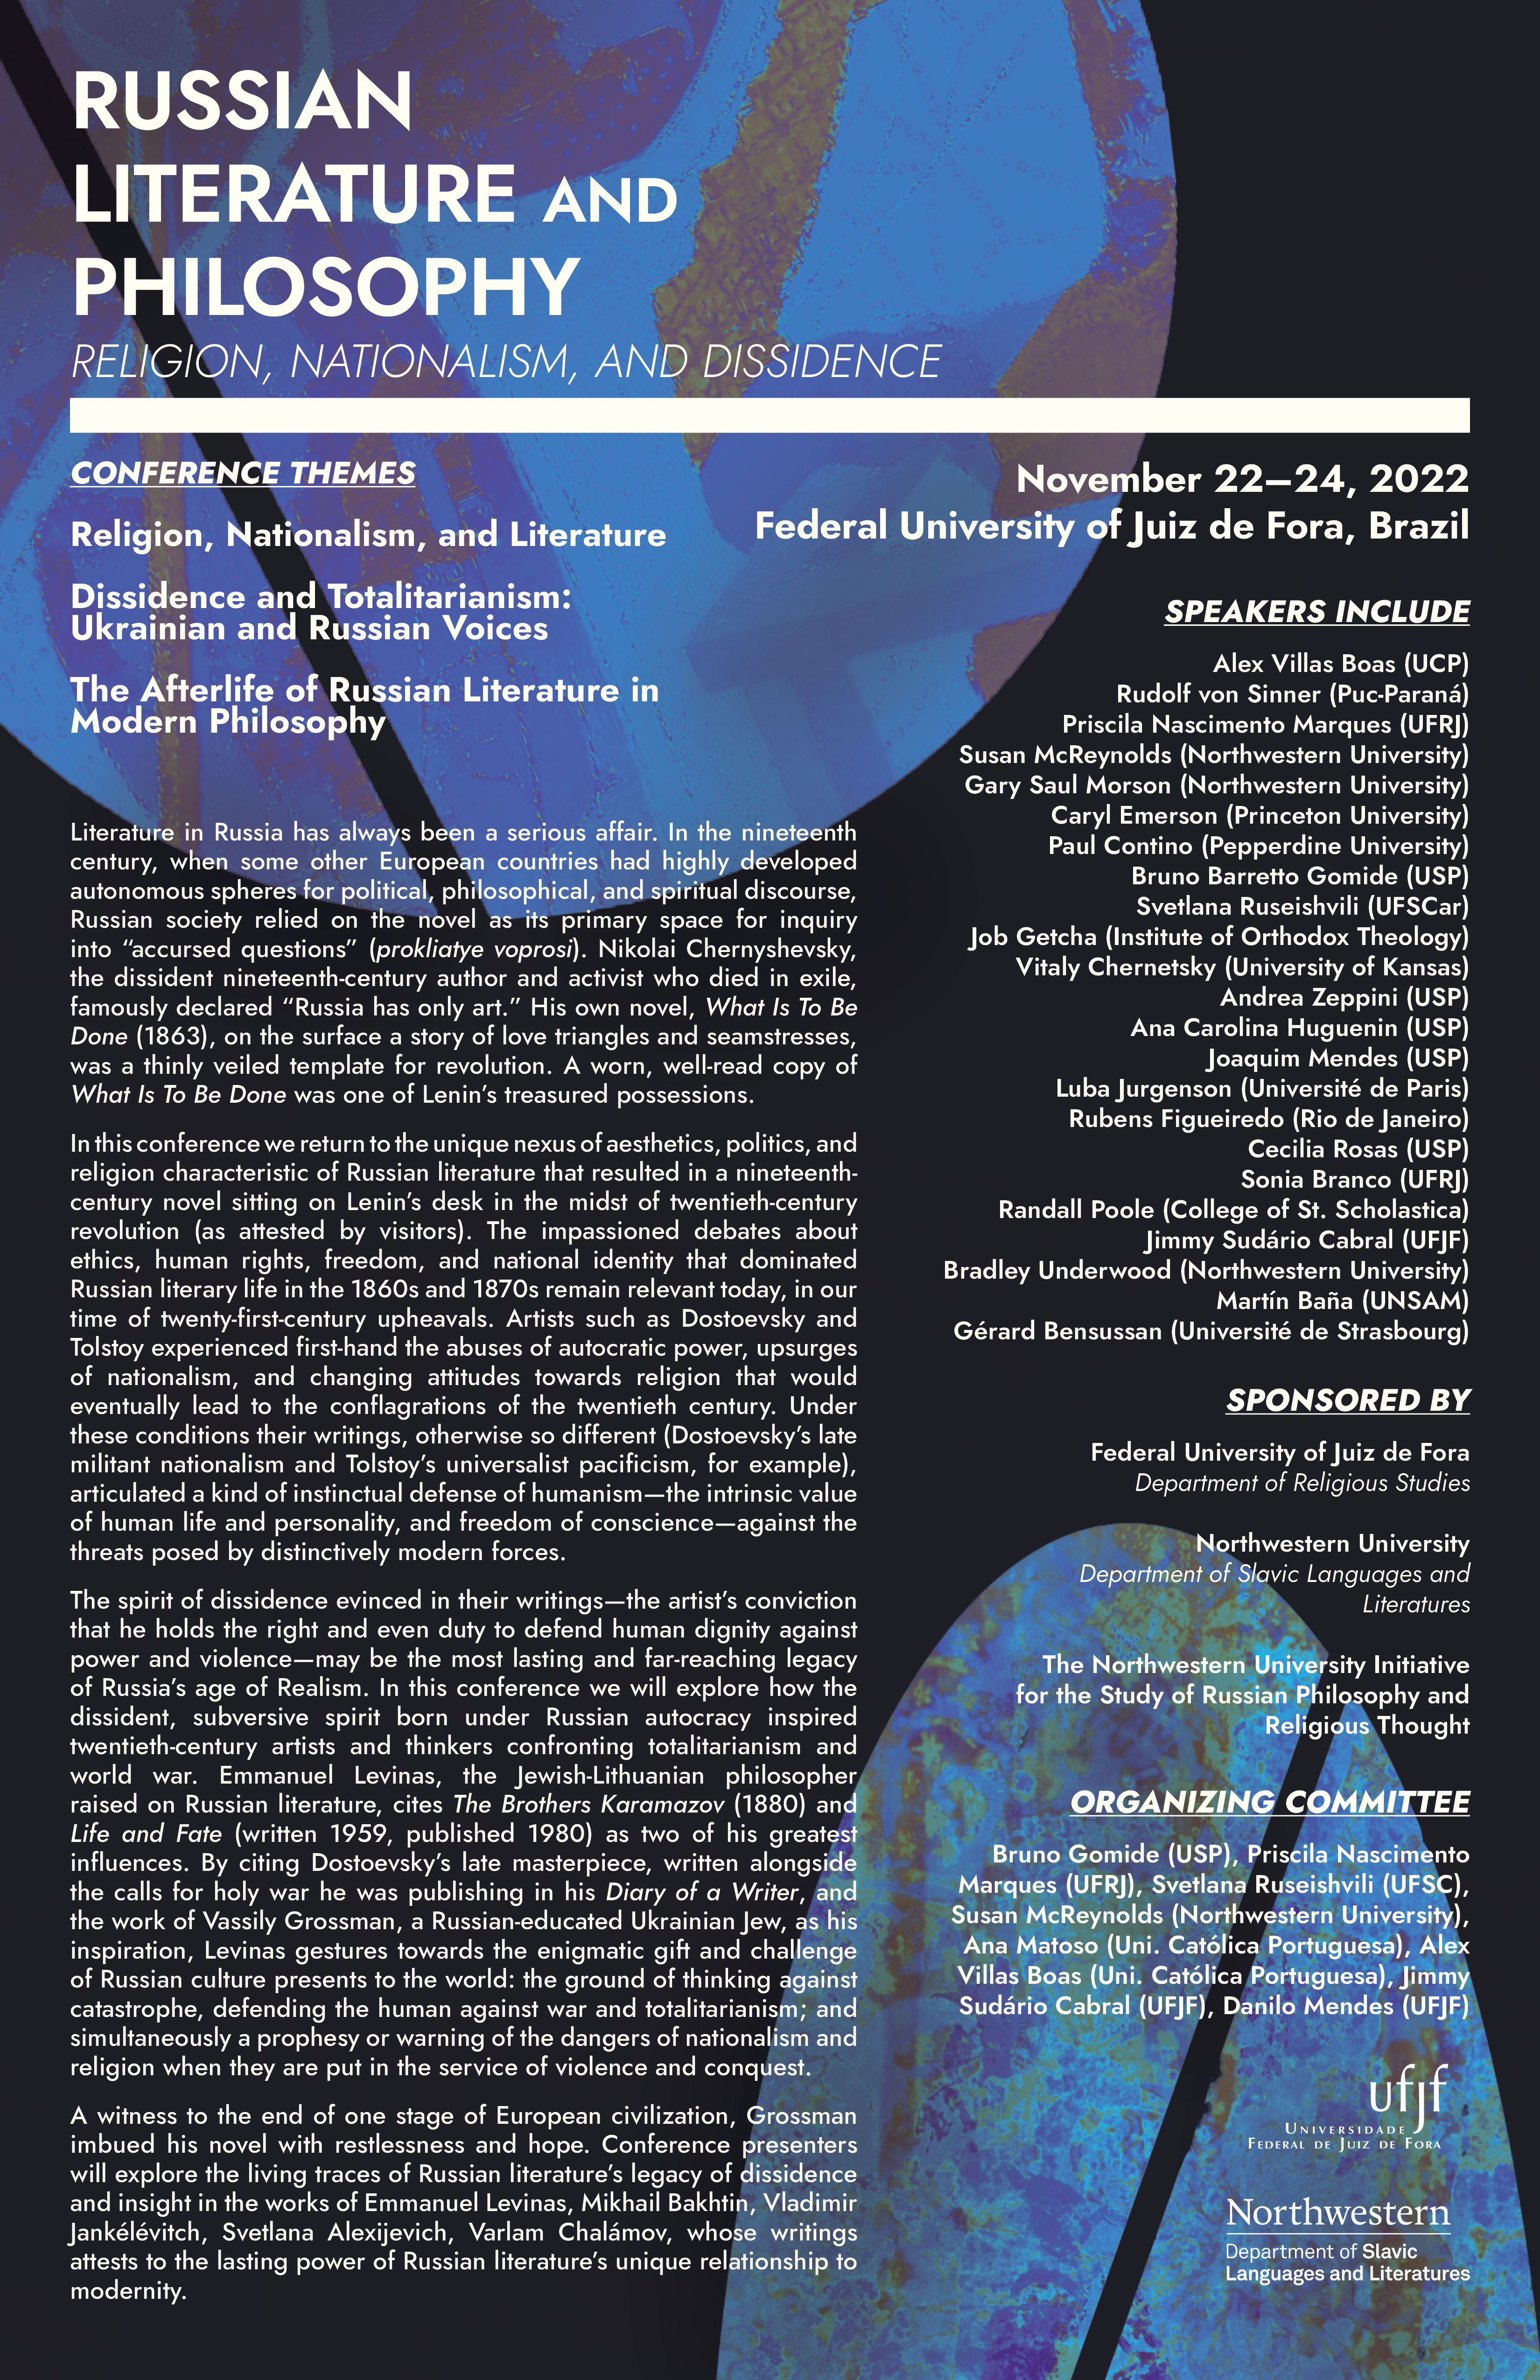 russian-literature-and-philosophy_conference-flyer_11.22-24.2022.png